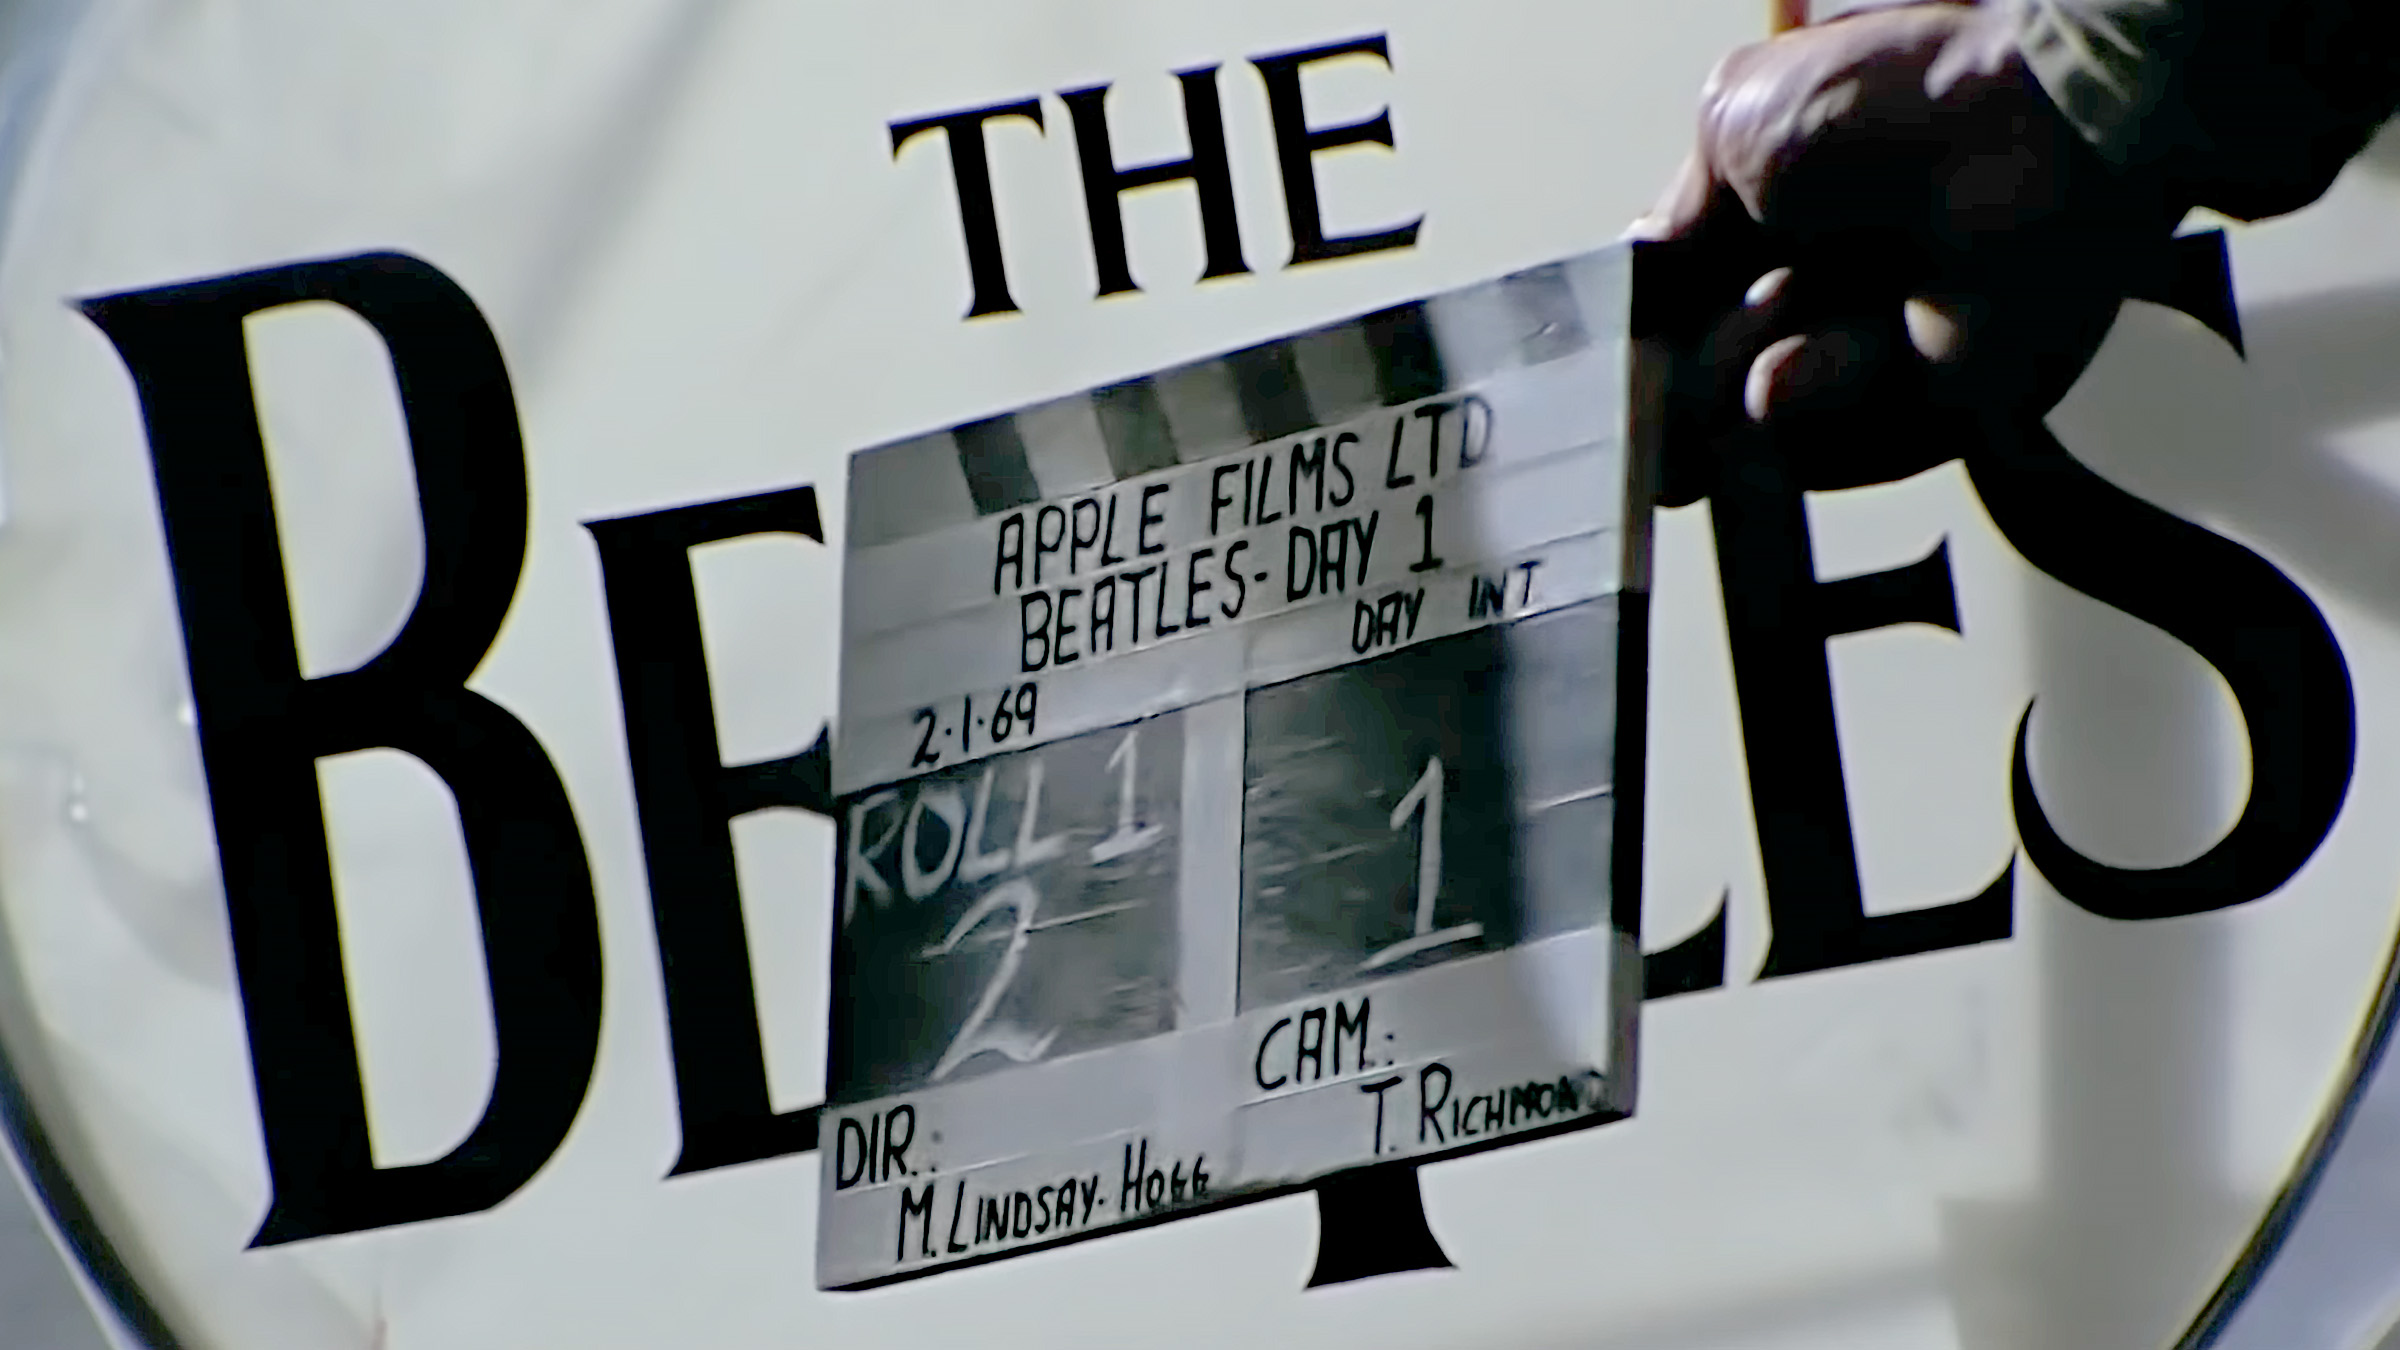 Art of the Cut: Old Doc, New Tricks in Peter Jackson’s “The Beatles: Get Back”